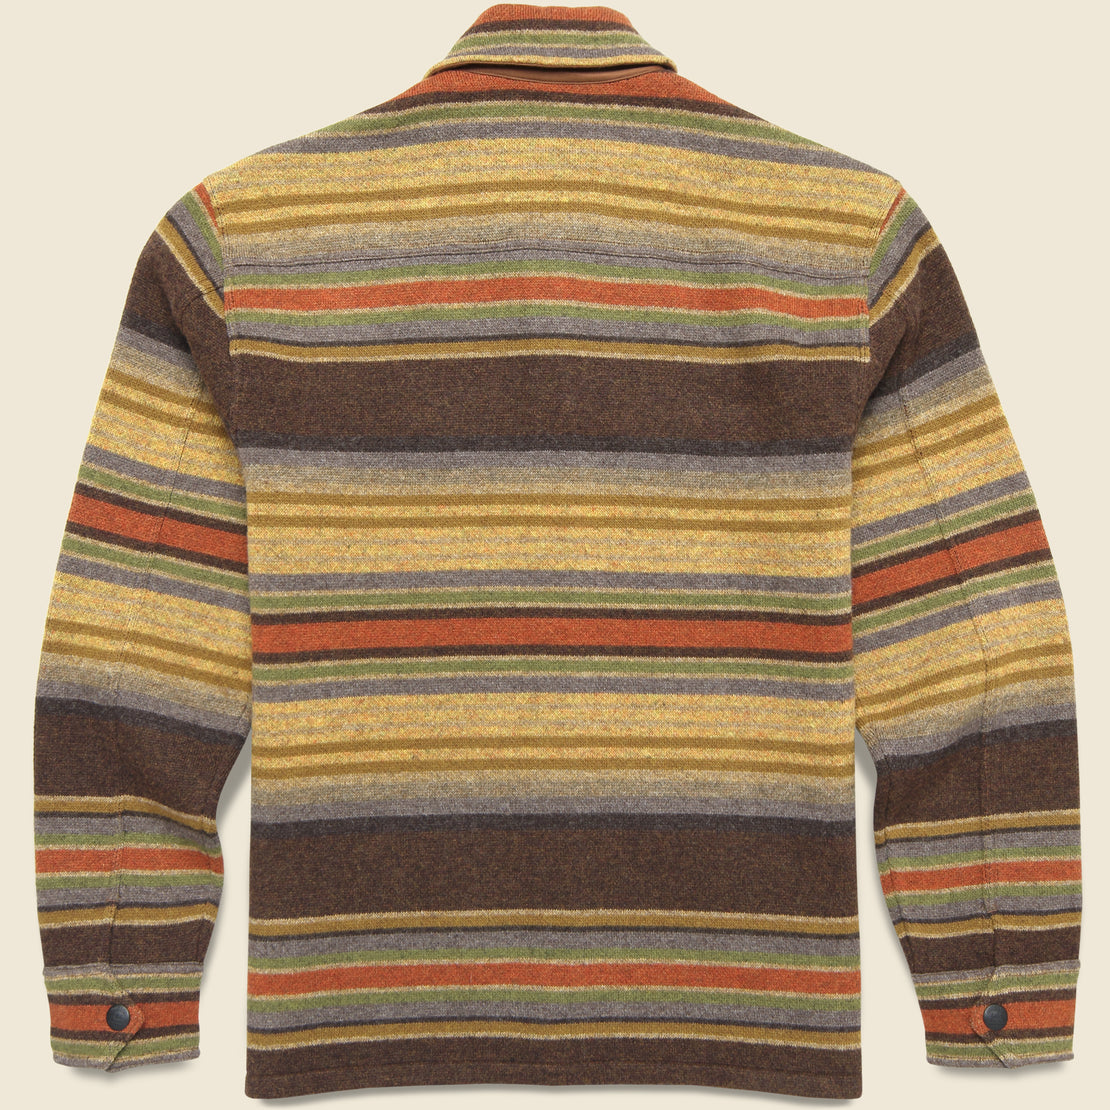 Striped Jacquard Sweater Shirt - Multi - RRL - STAG Provisions - Tops - Sweater